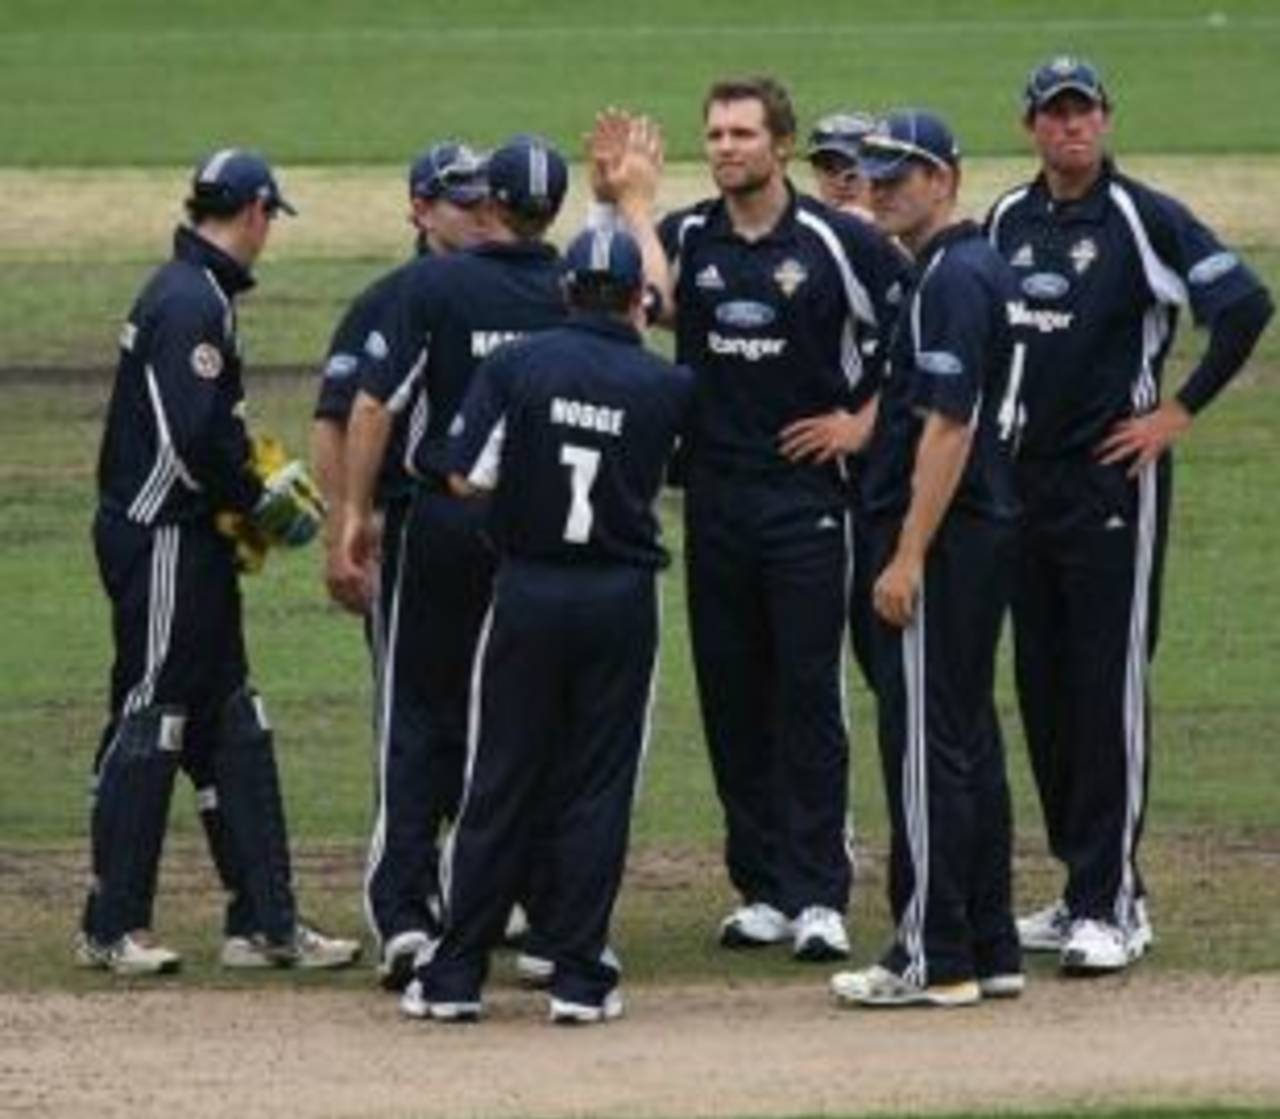 Dirk Nannes celebrates one of his three wickets, Victoria v New South Wales, FR Cup, Melbourne, November 28, 2007